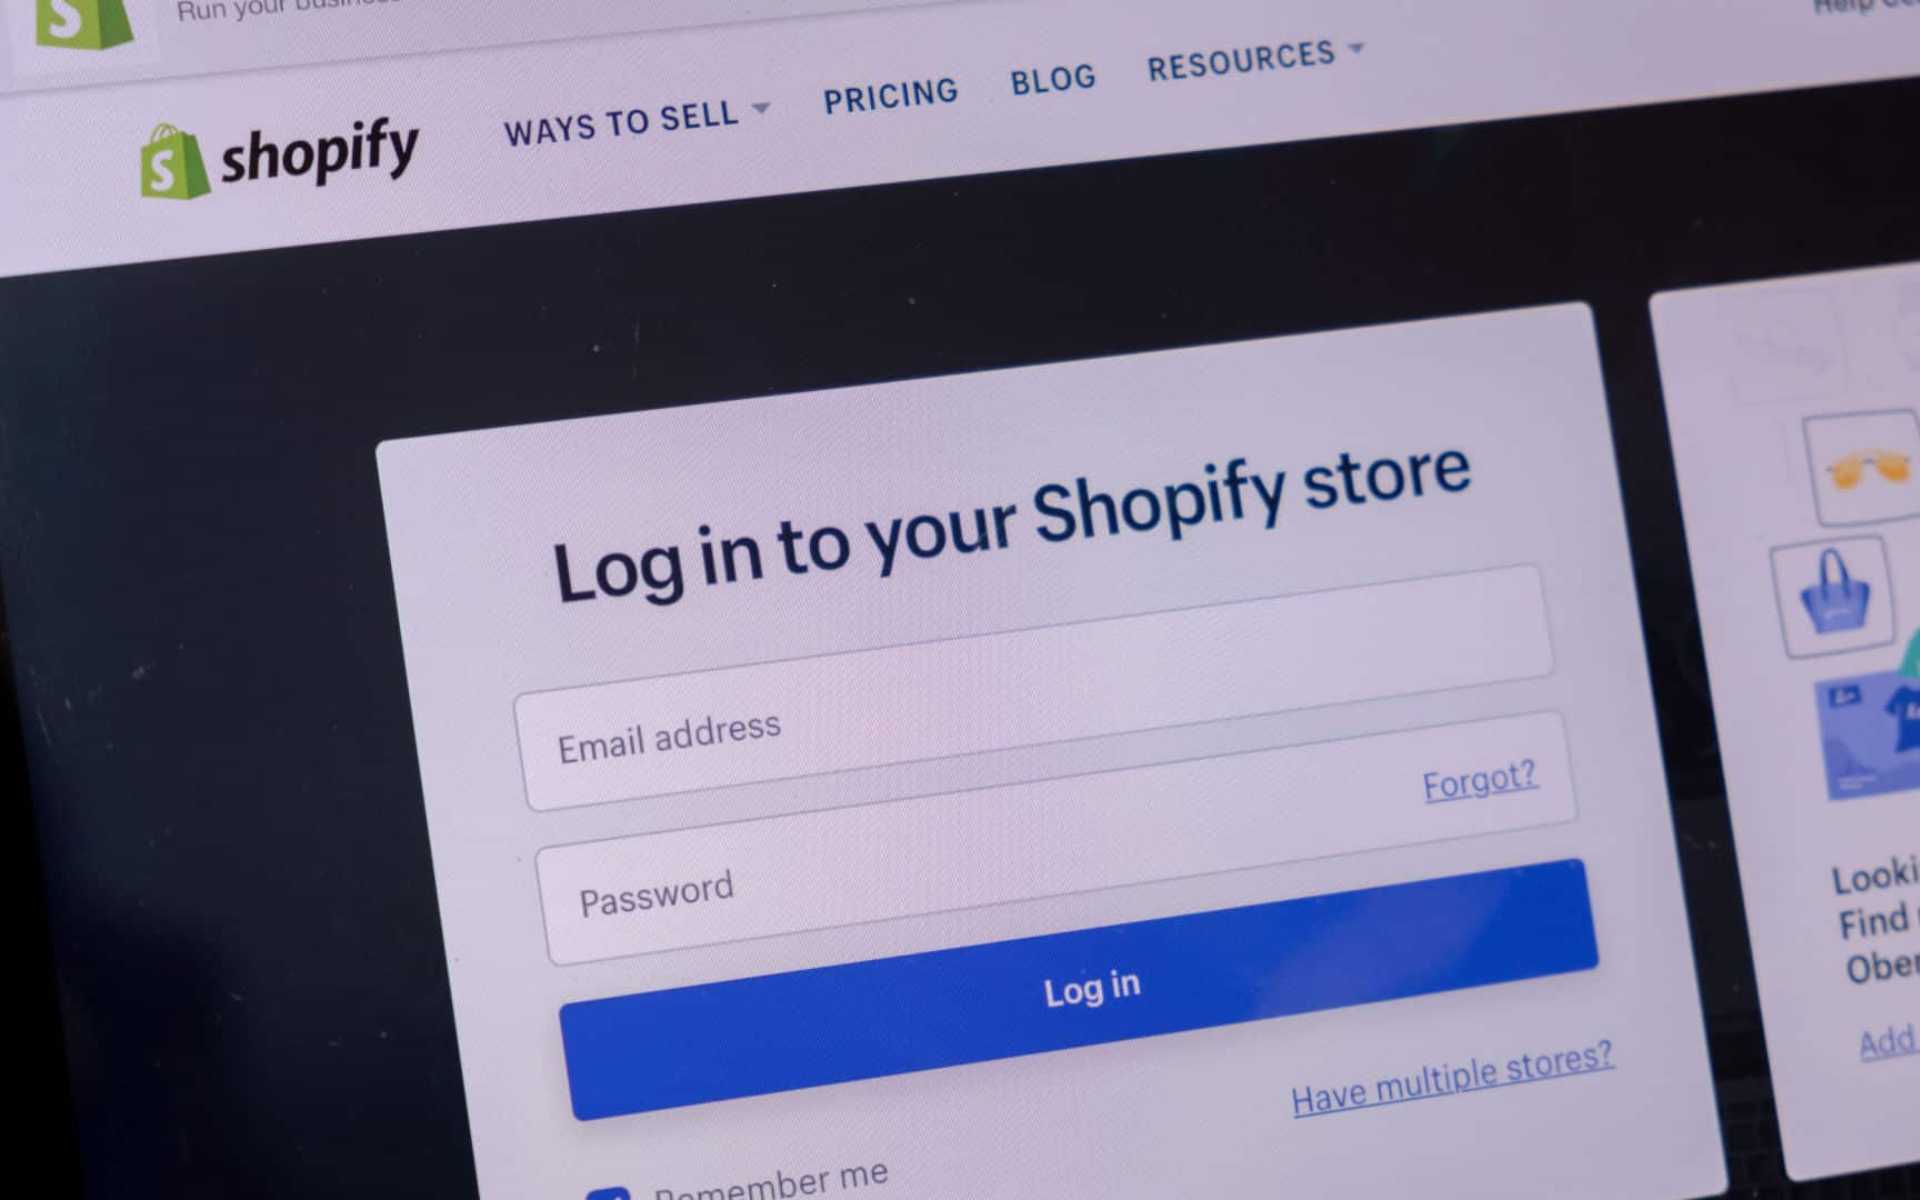 Commerce Components By Shopify Gives Large Retailers New Ways To Use The Platform